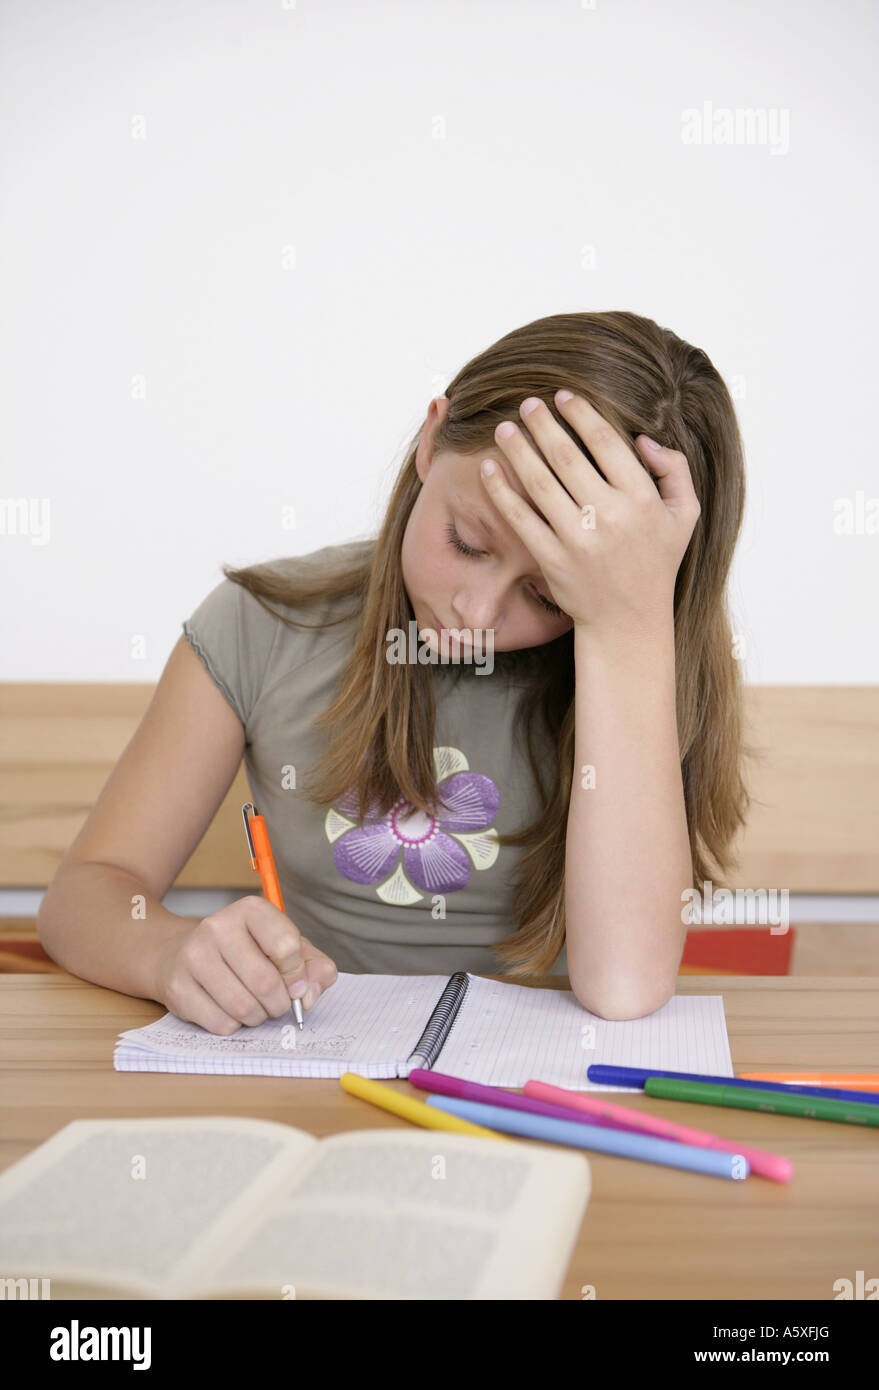 Girl with pen and exercise book on desk Stock Photo